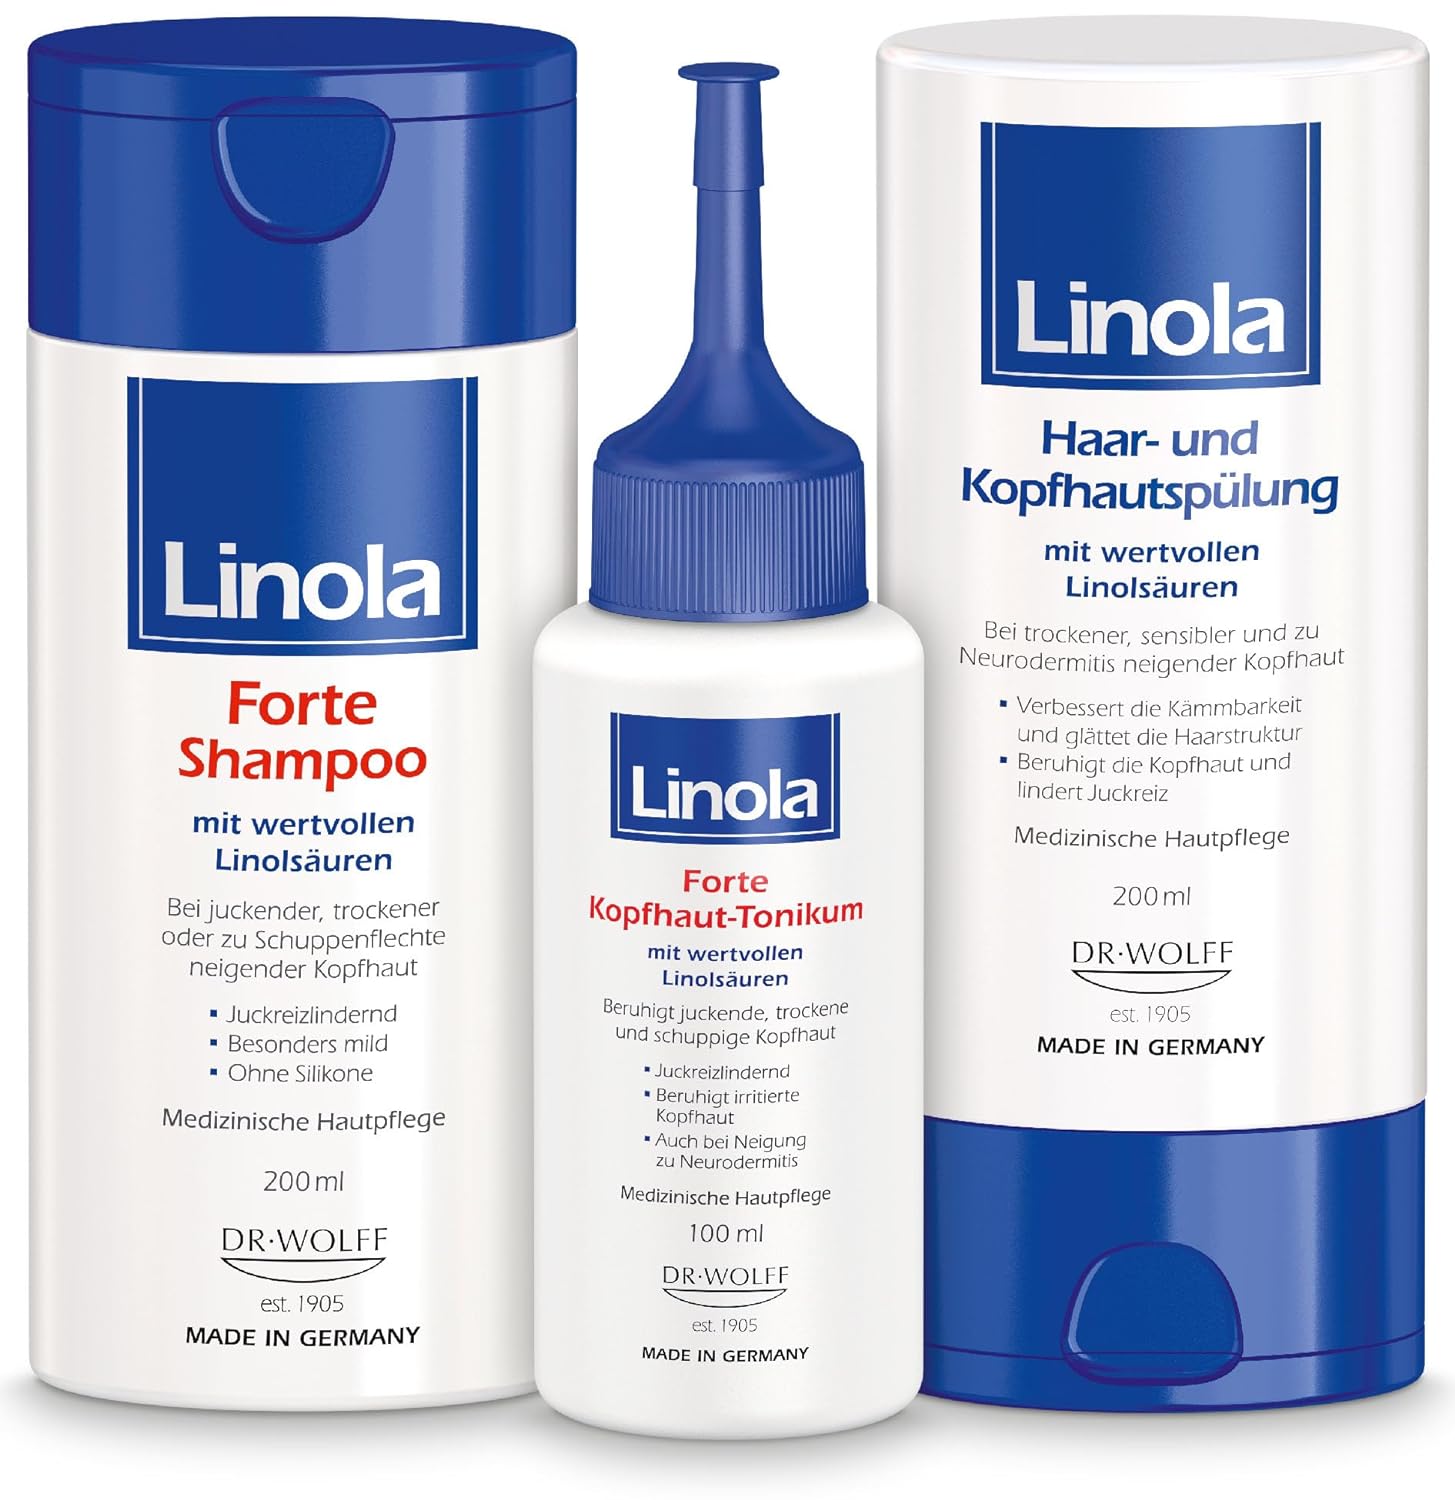 Linola Forte Shampoo + Hair and Scalp Conditioner + Forte Scalp Tonic - 200 ml, 200 ml, 100 ml | Scalp Care Set for Itchy, Dry and Flaky Scalp